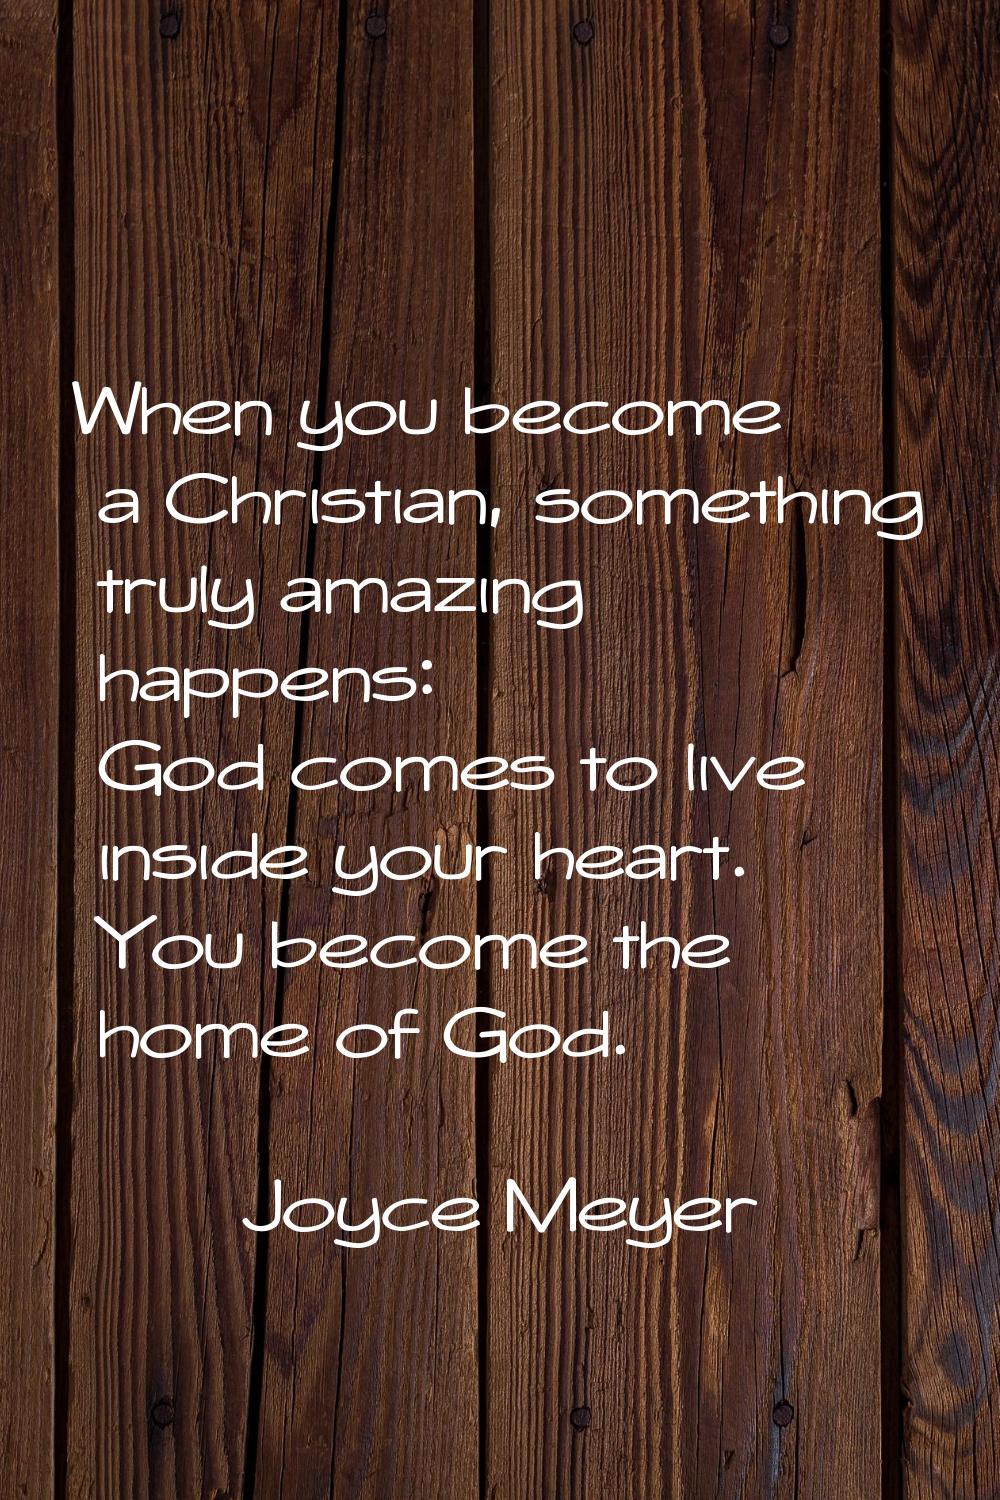 When you become a Christian, something truly amazing happens: God comes to live inside your heart. 